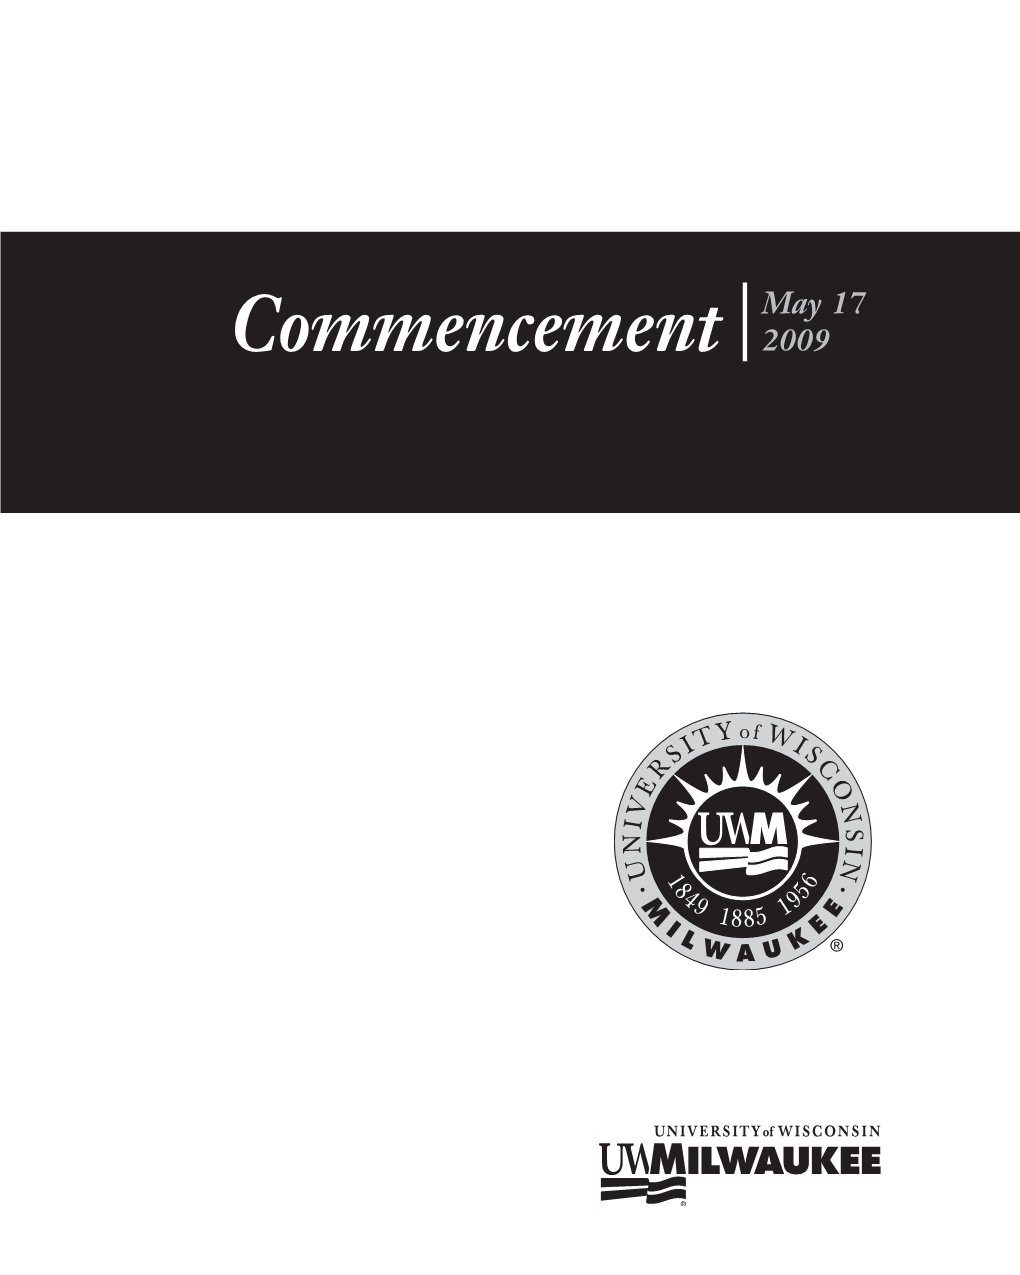 Commencement May 17, 2009